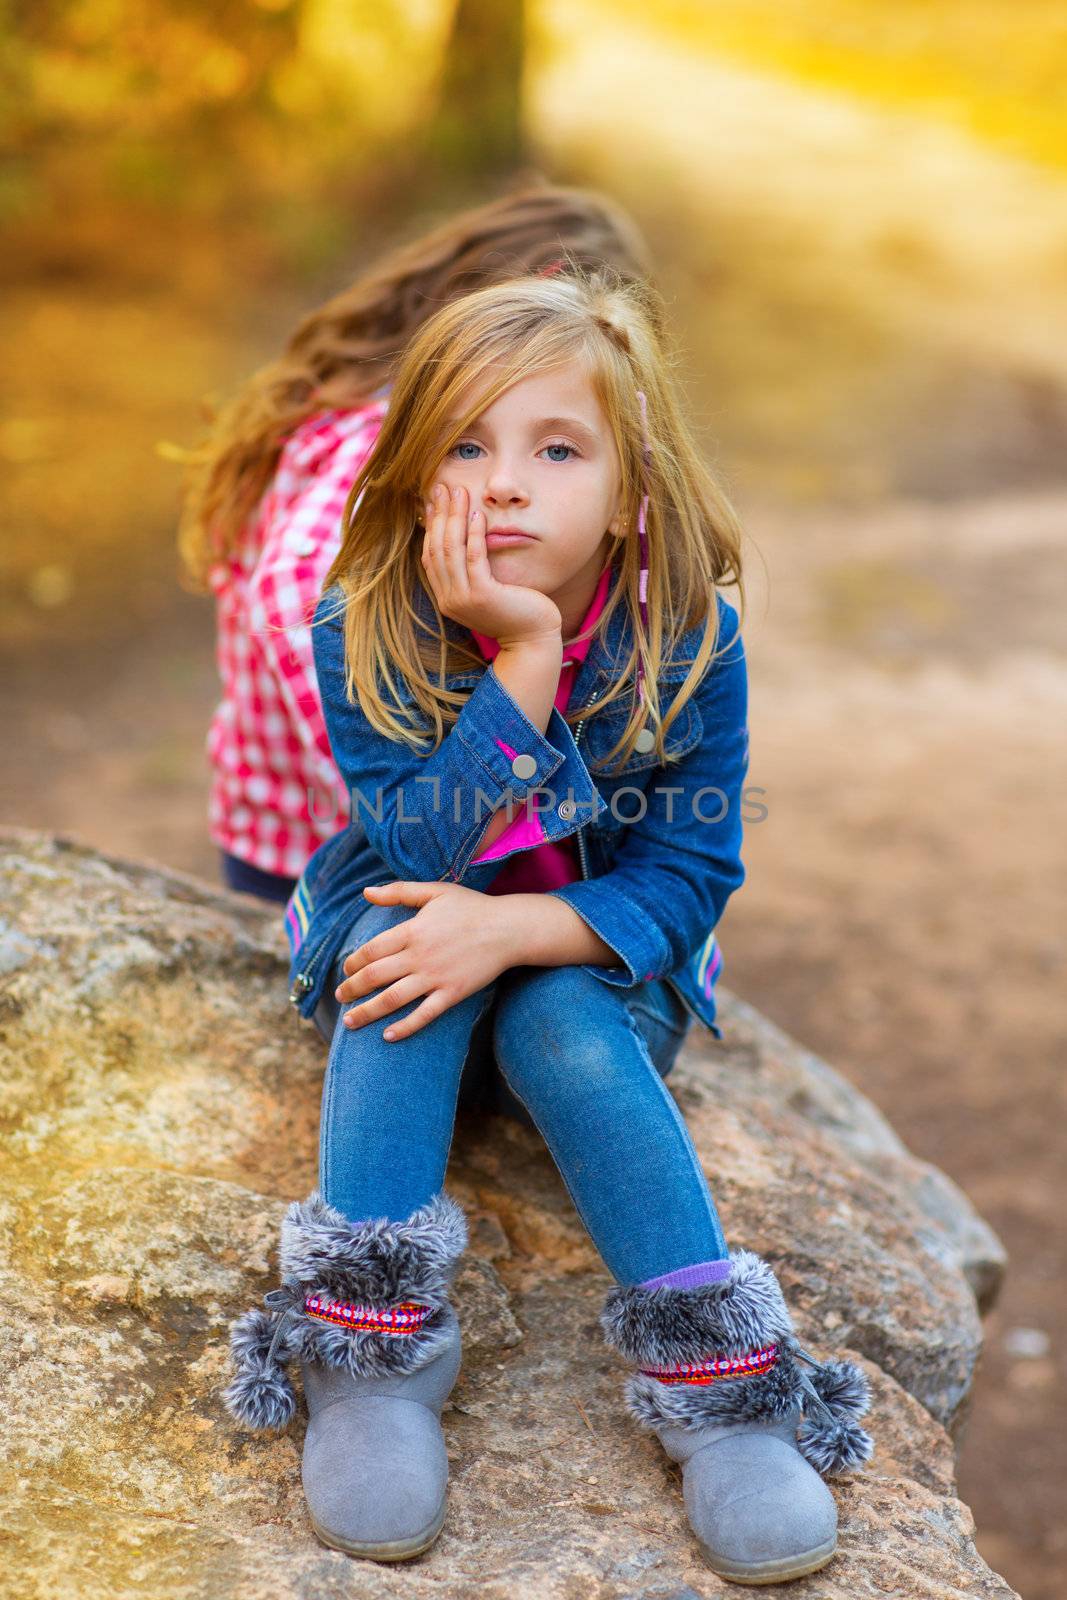 blond kid girl pensive bored expression in the forest outdoor sitting on a rock